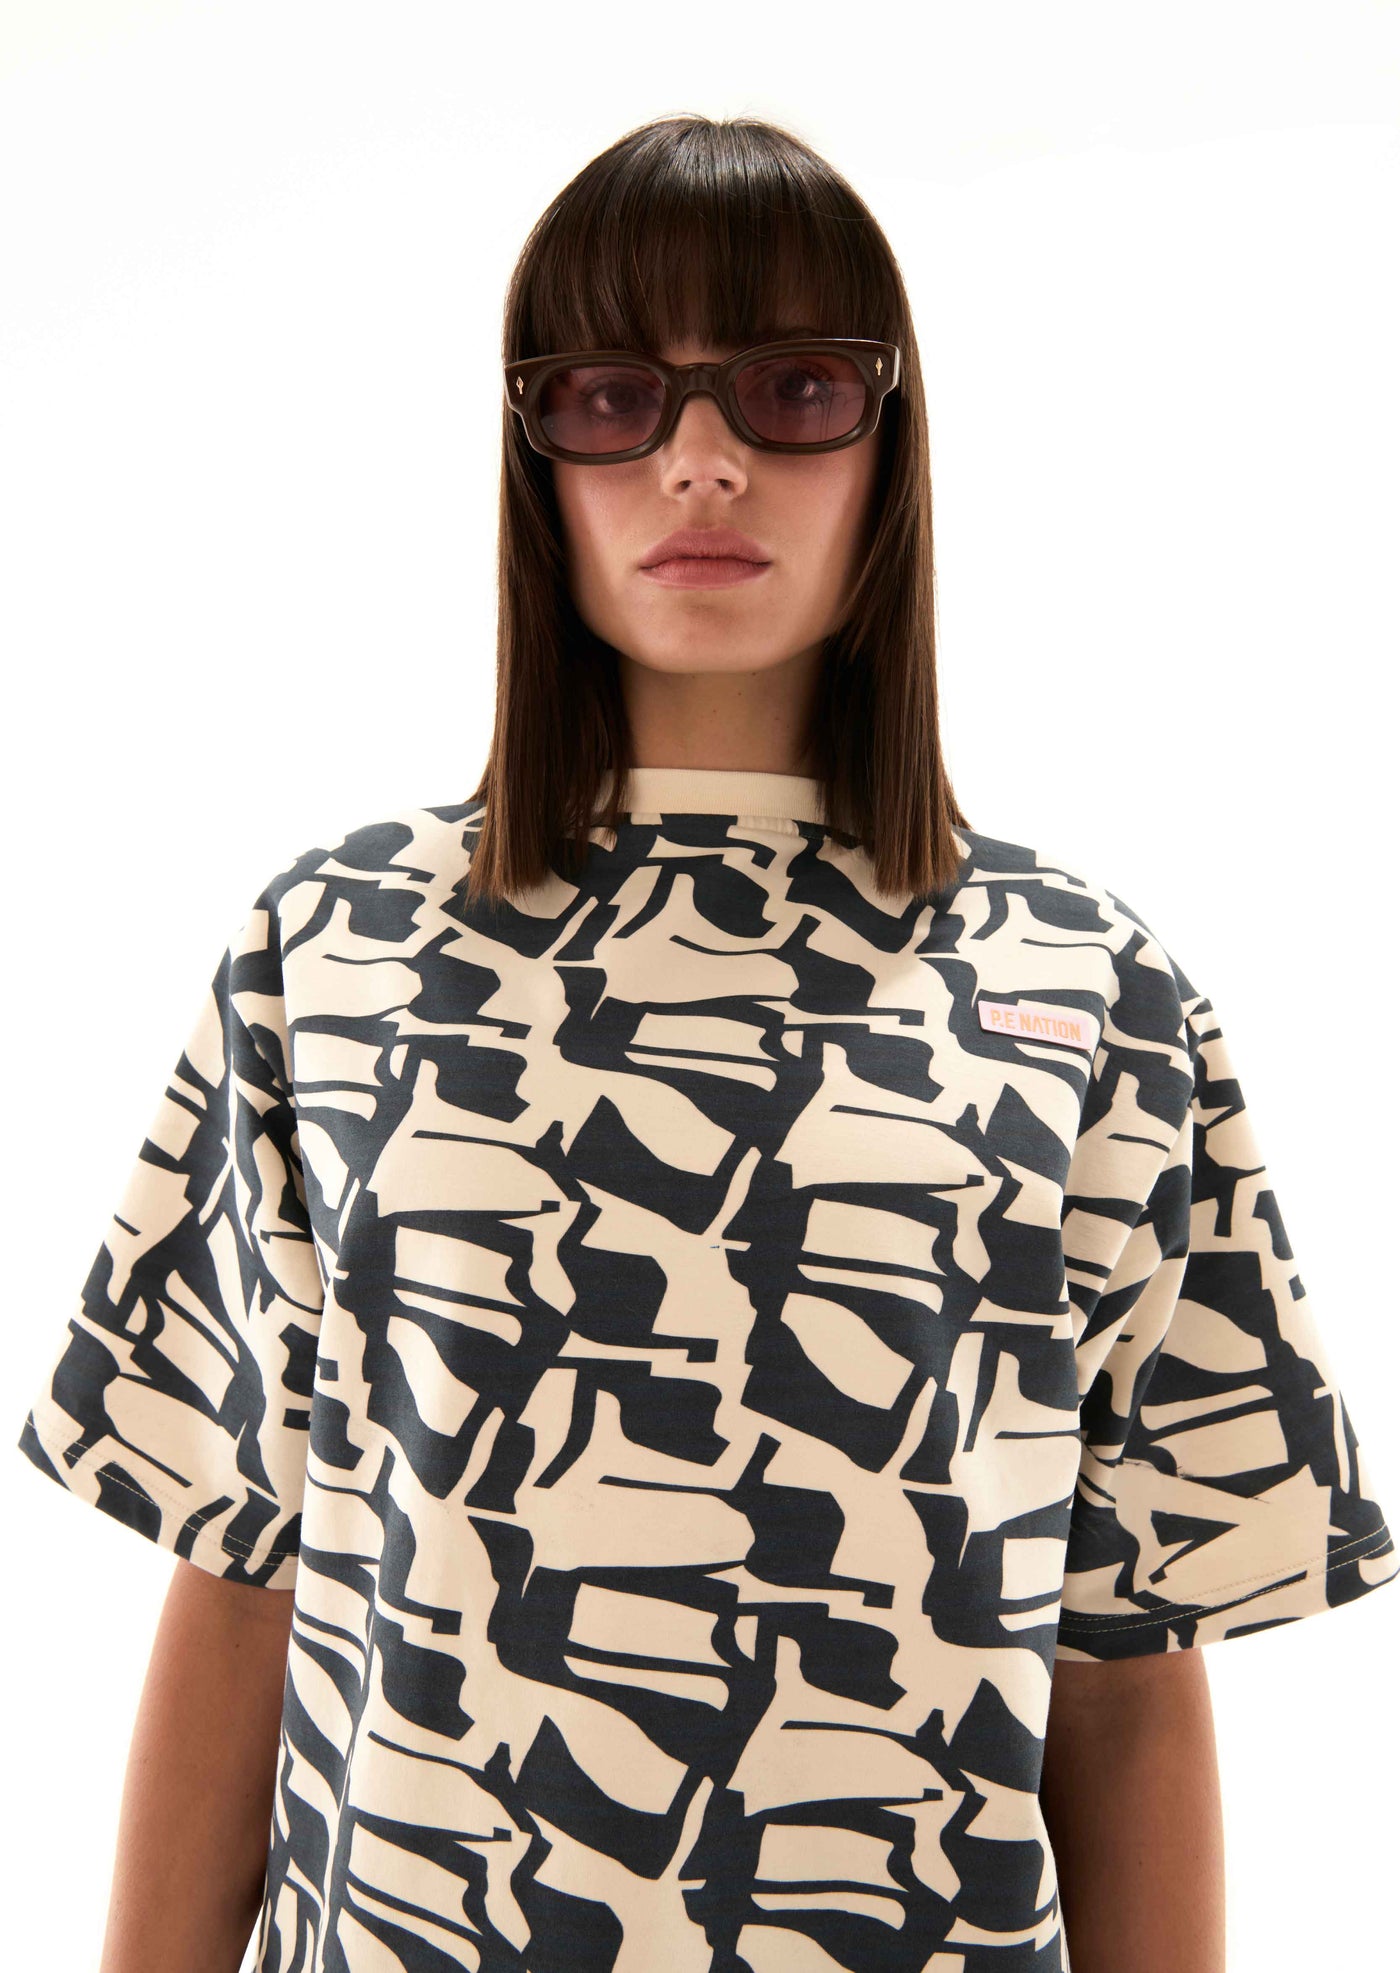 ROCKLAND TEE IN ABSTRACT PRINT